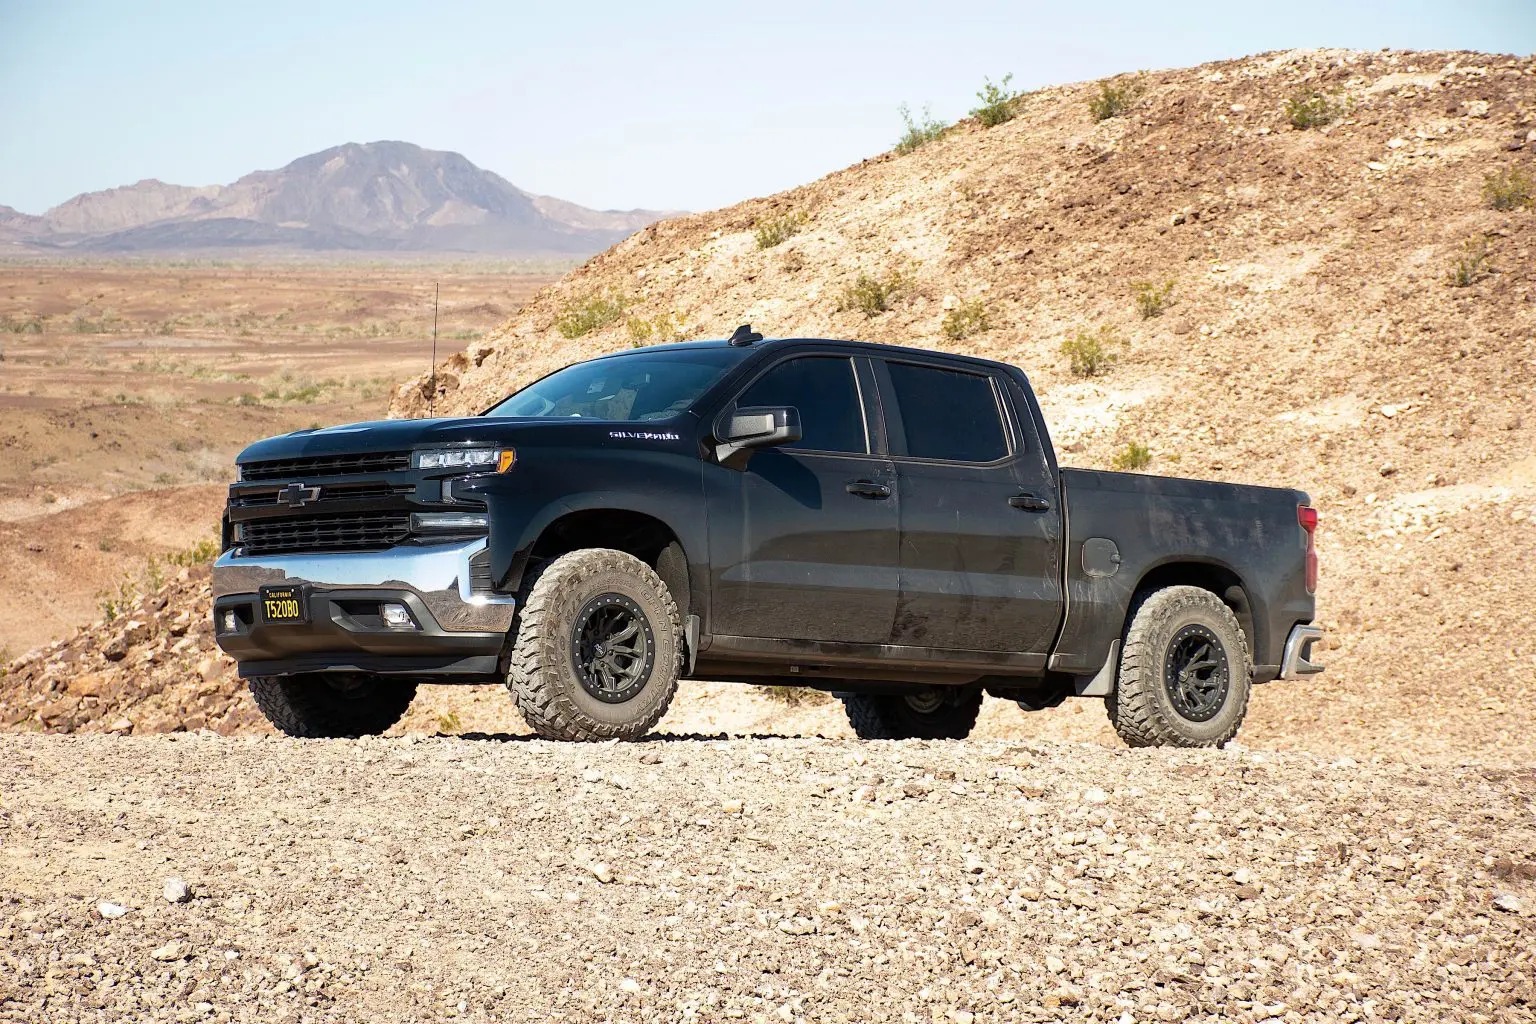 A black Chevrolet truck on a rocky road.